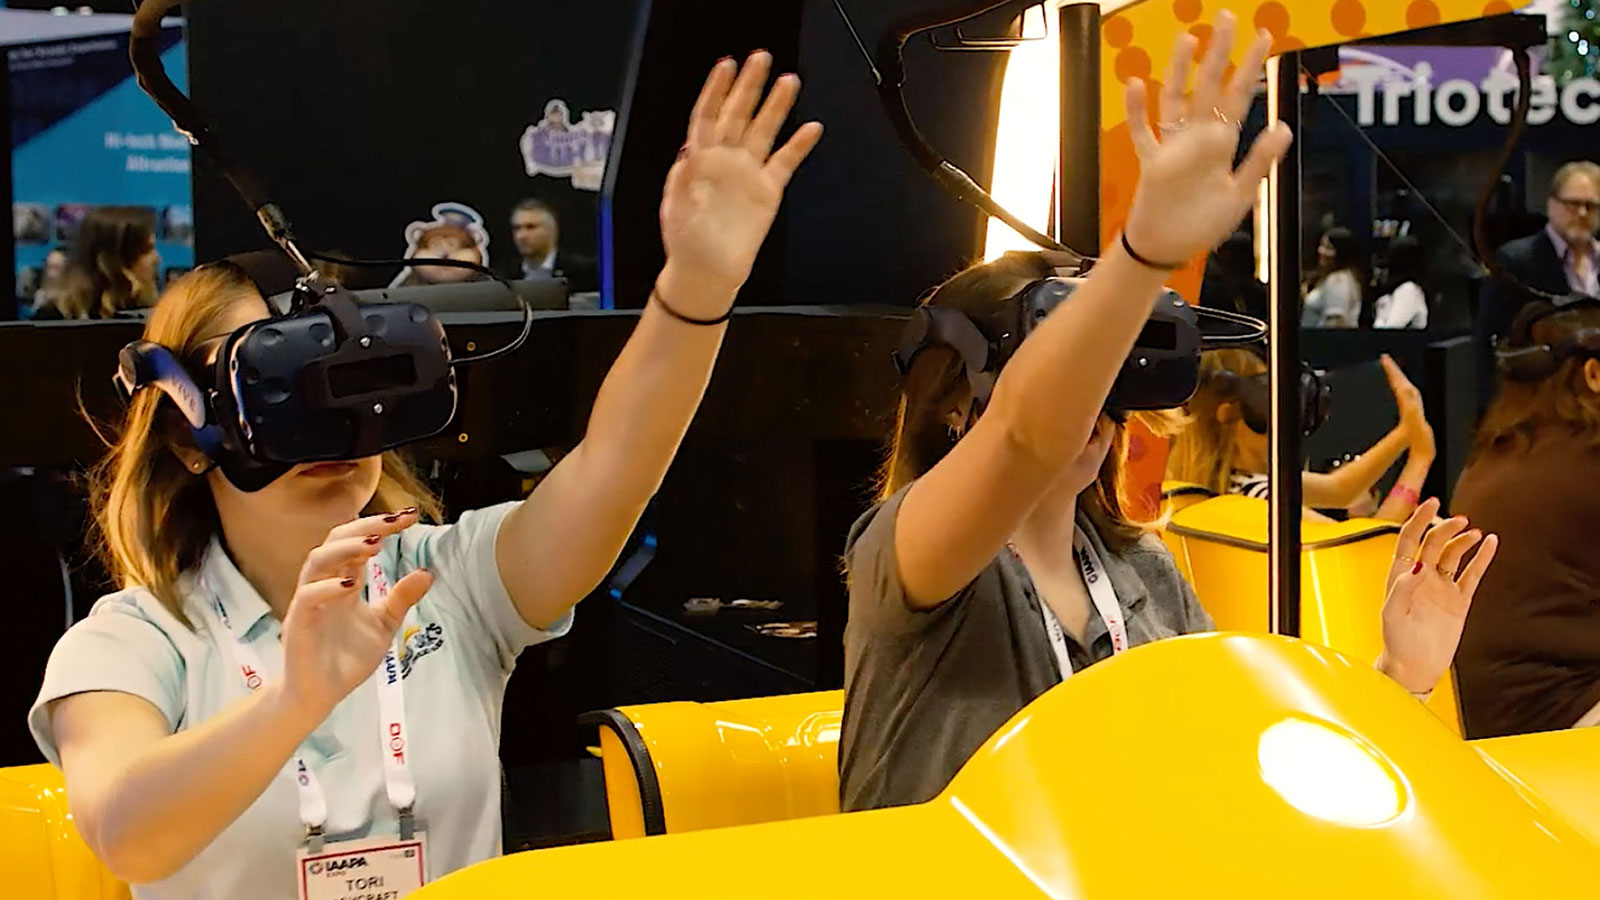 Triotech's Storm VR at IAAPA